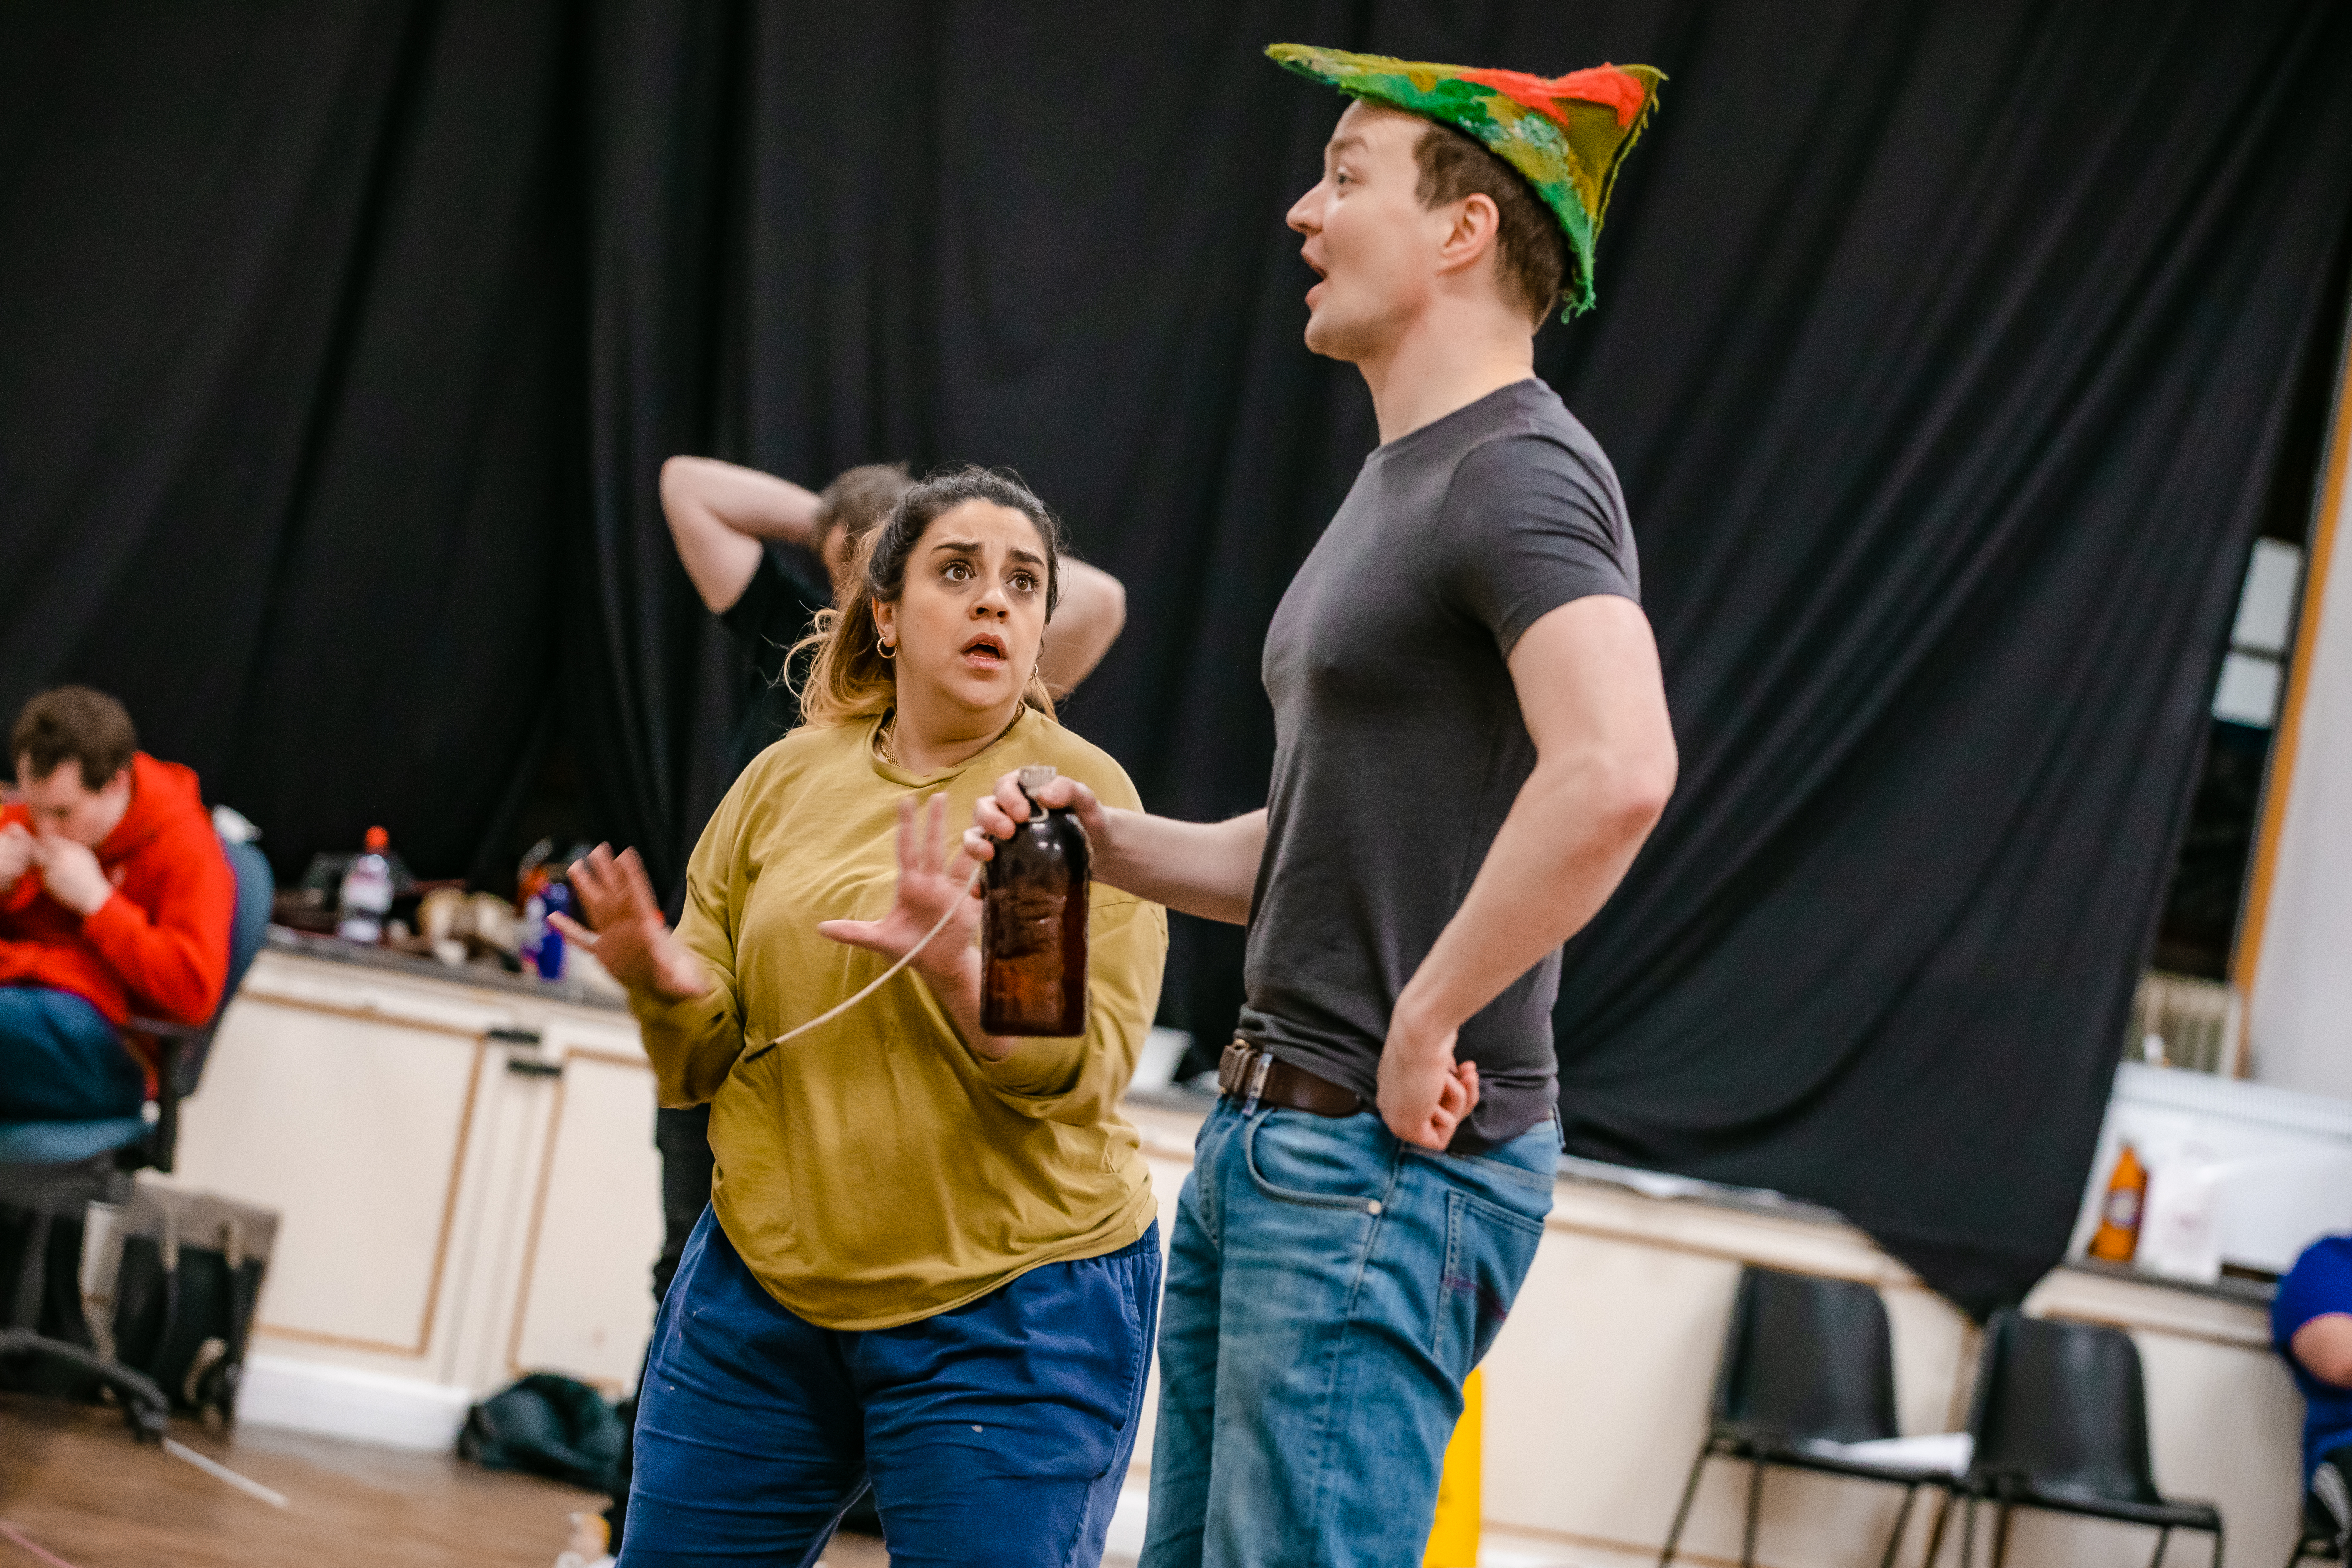 Nancy Zamit and Greg Tannahill in rehearsals for Peter Pan Goes Wrong. Photo by Danny Kaan.